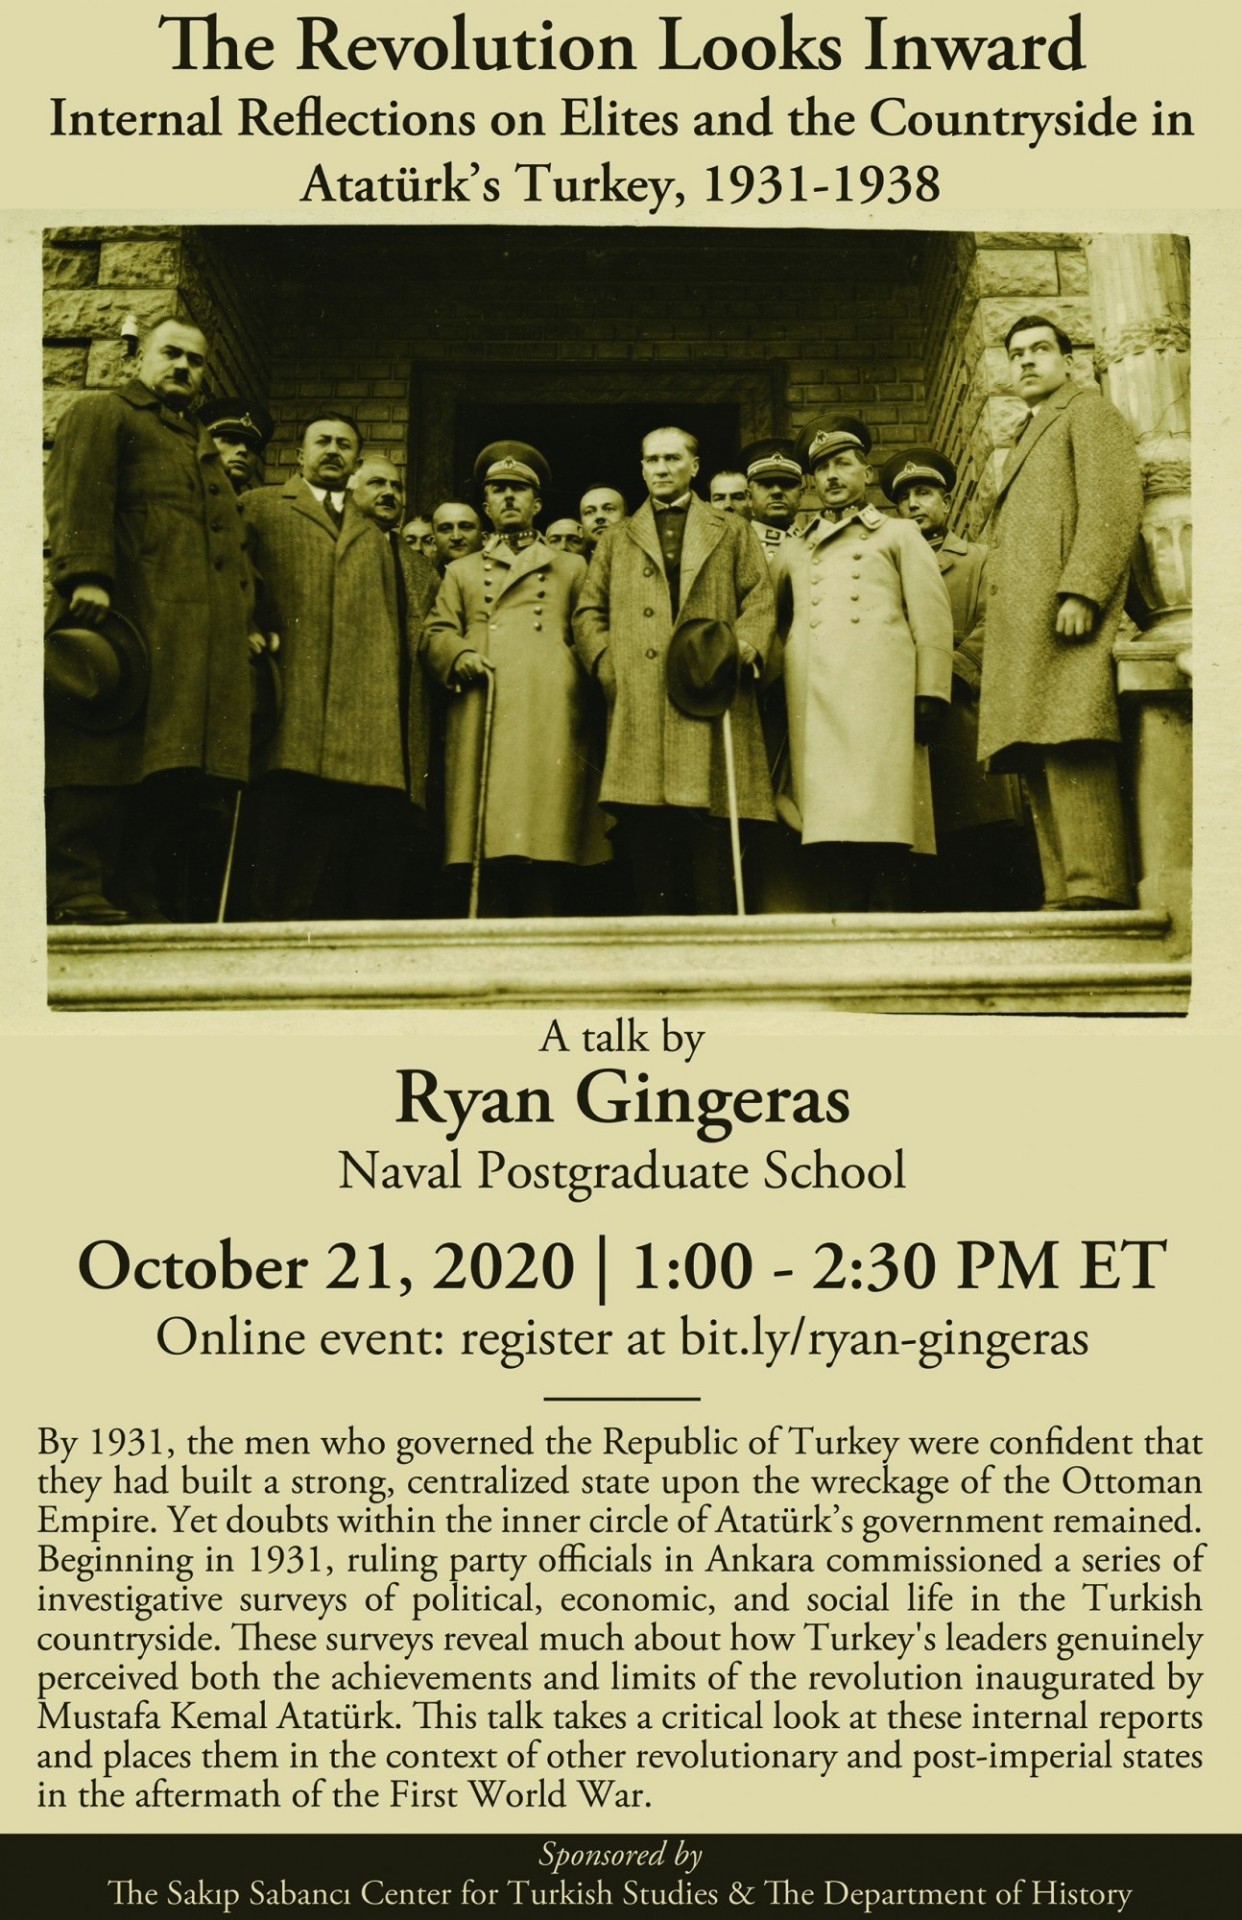 Flyer for lecture by Ryan Gingeras